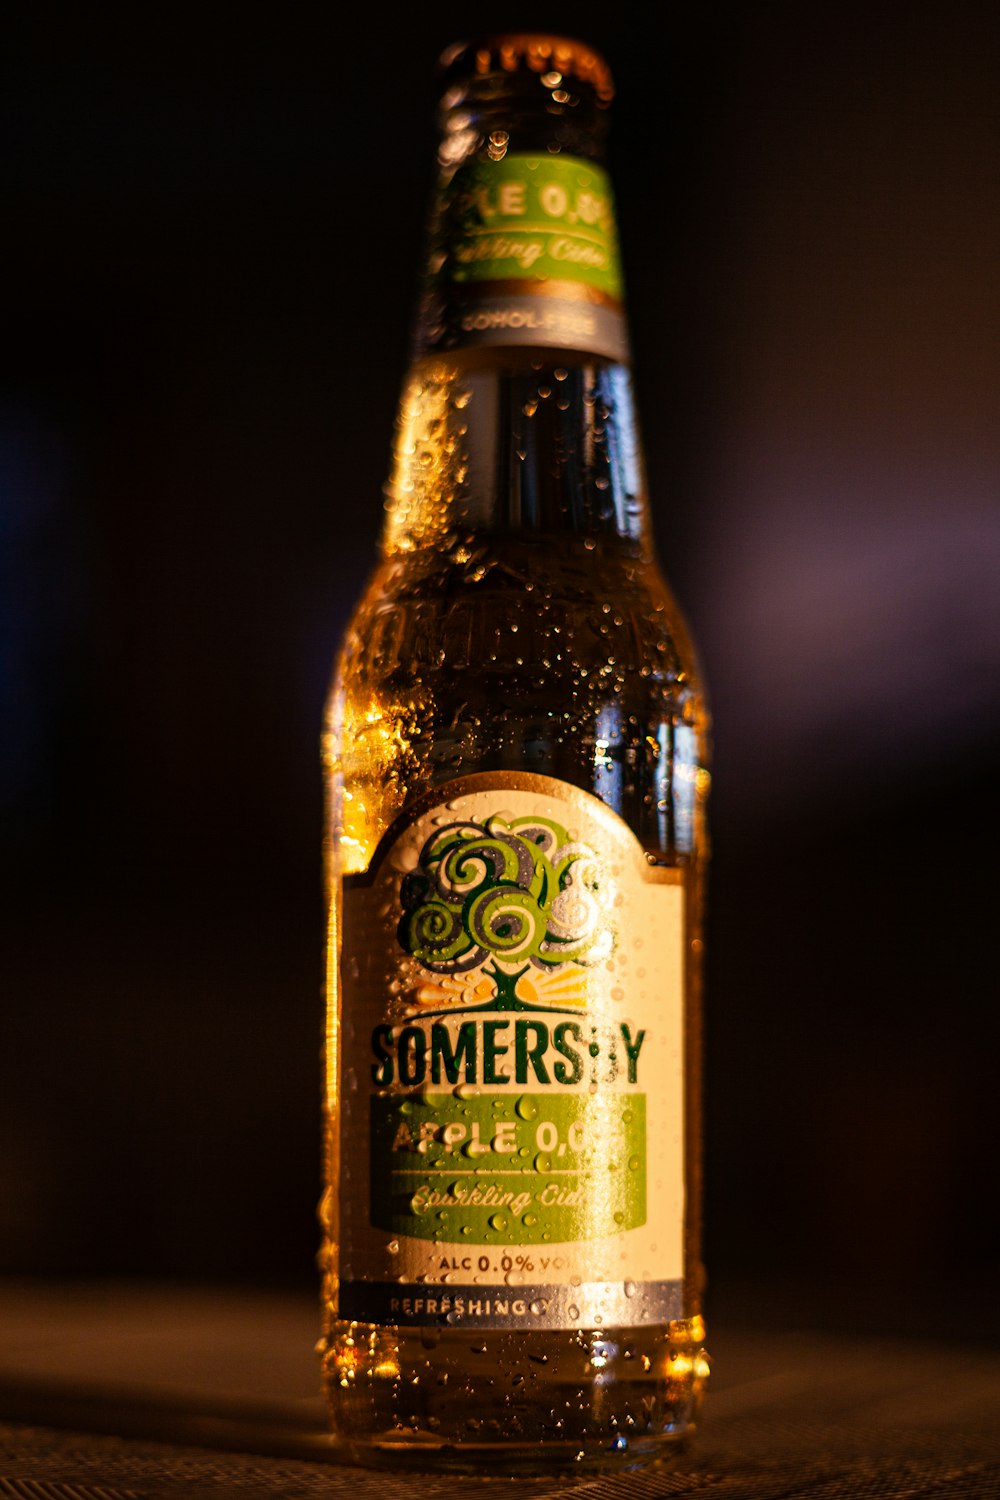 green and white-labeled apple-flavored beer bottle